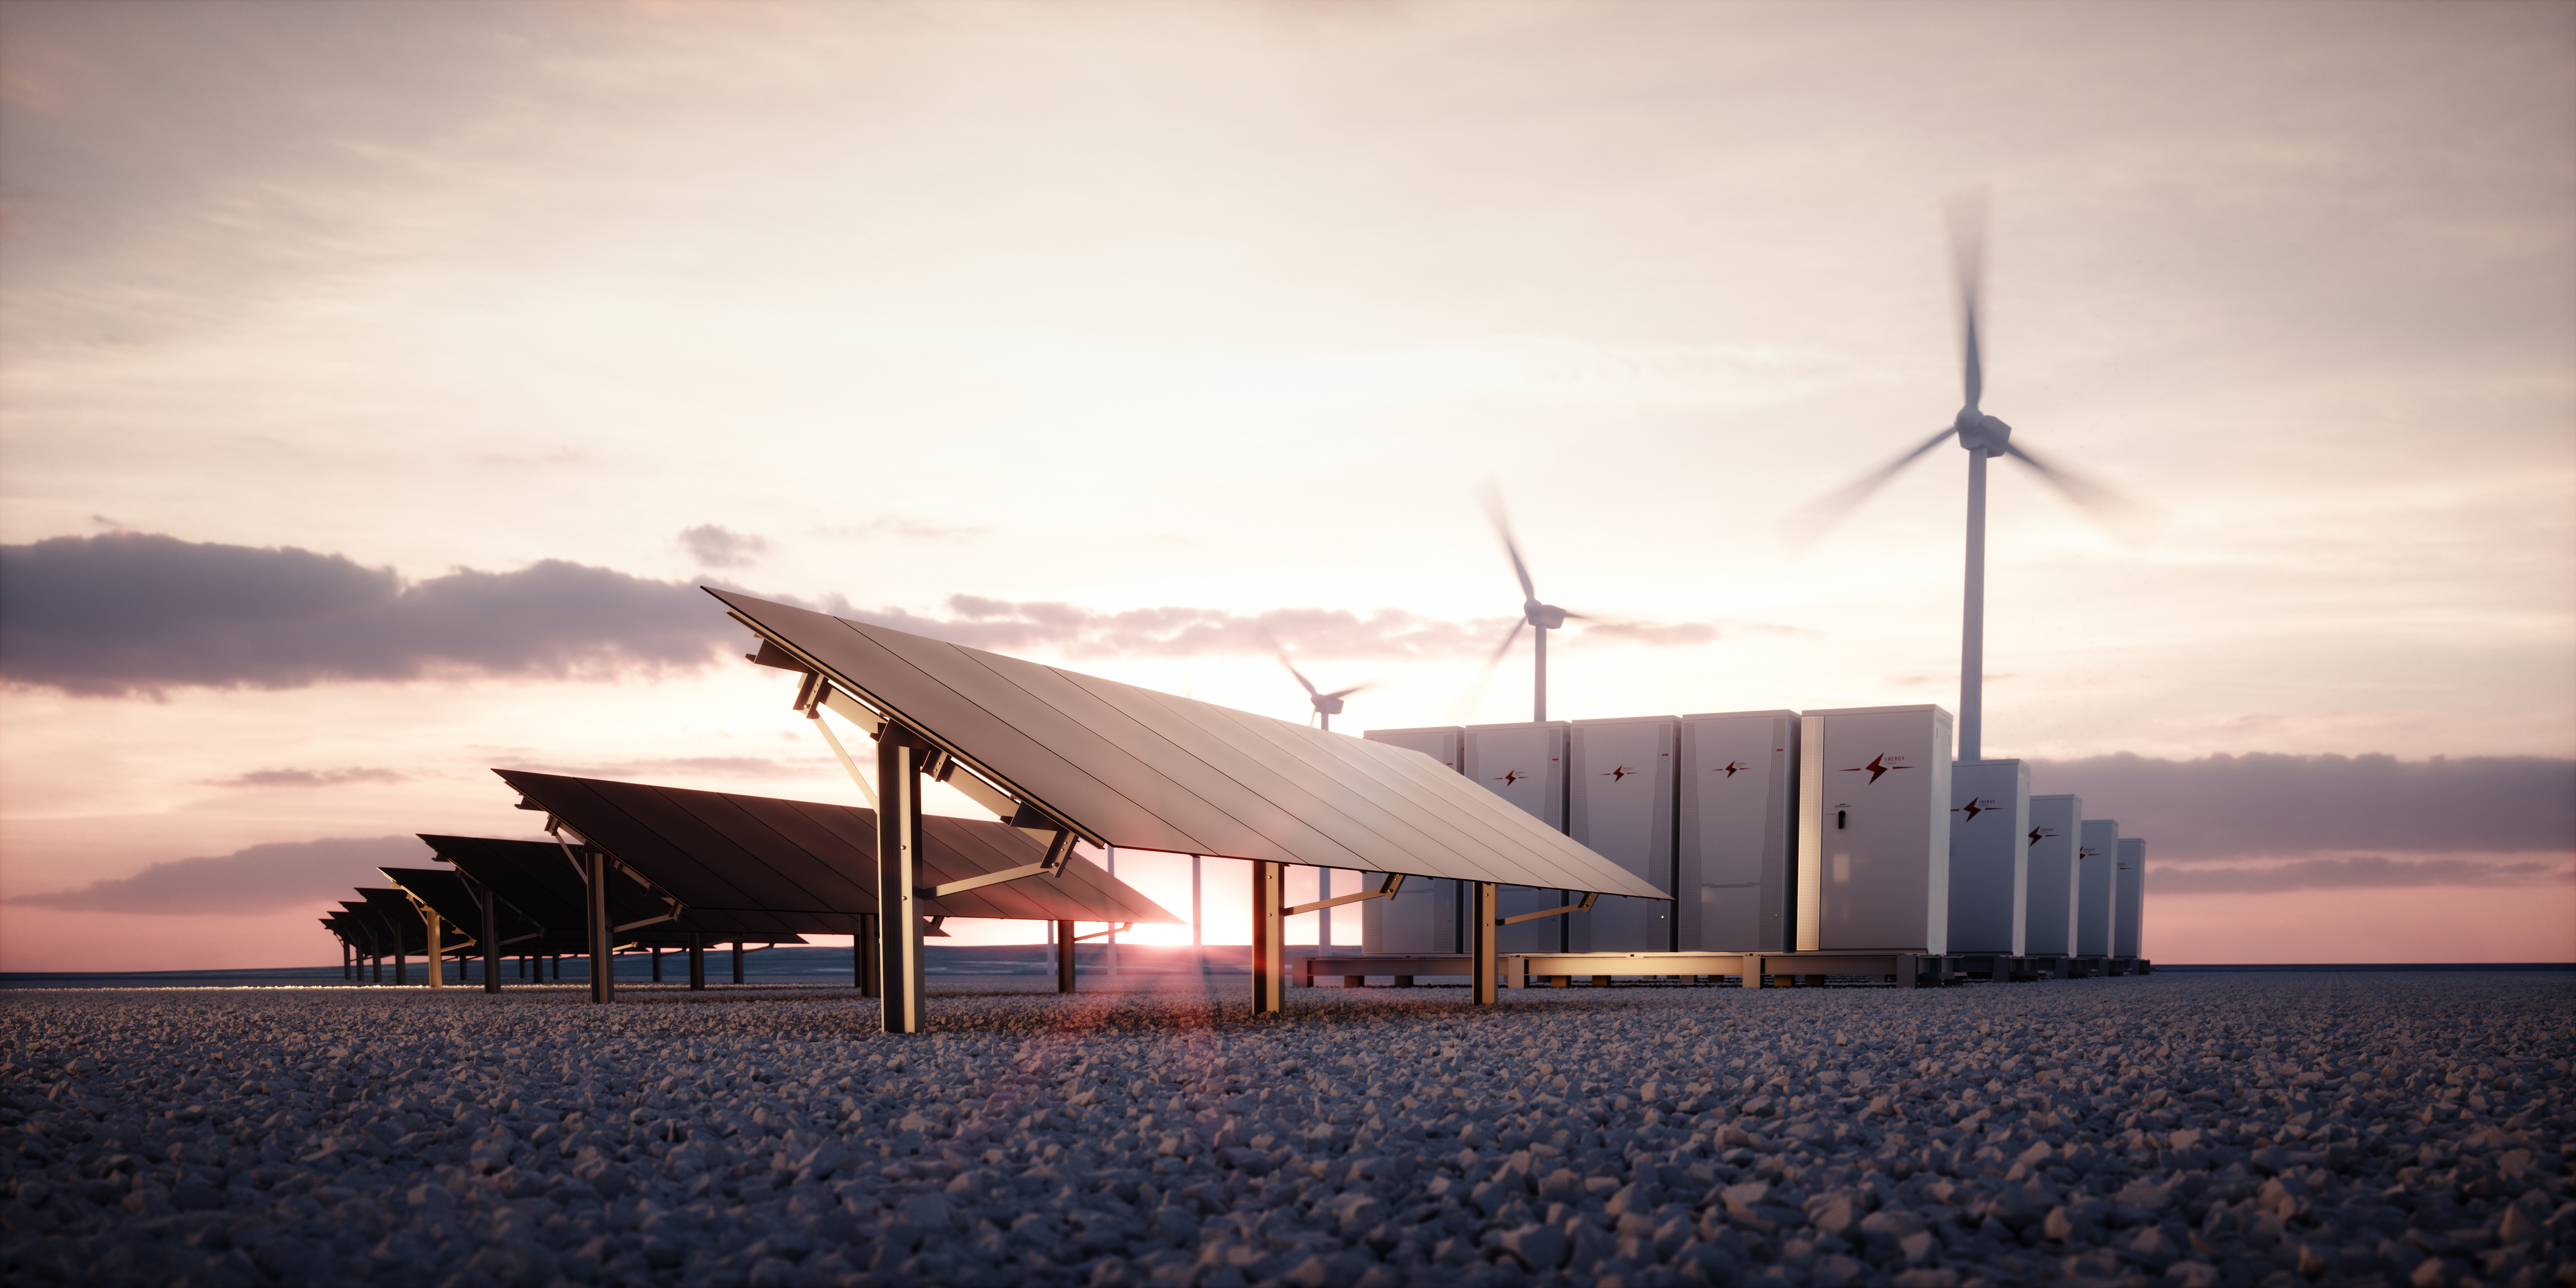 A major renewable energy company leveraged Thrive to power its IT security enhancements.